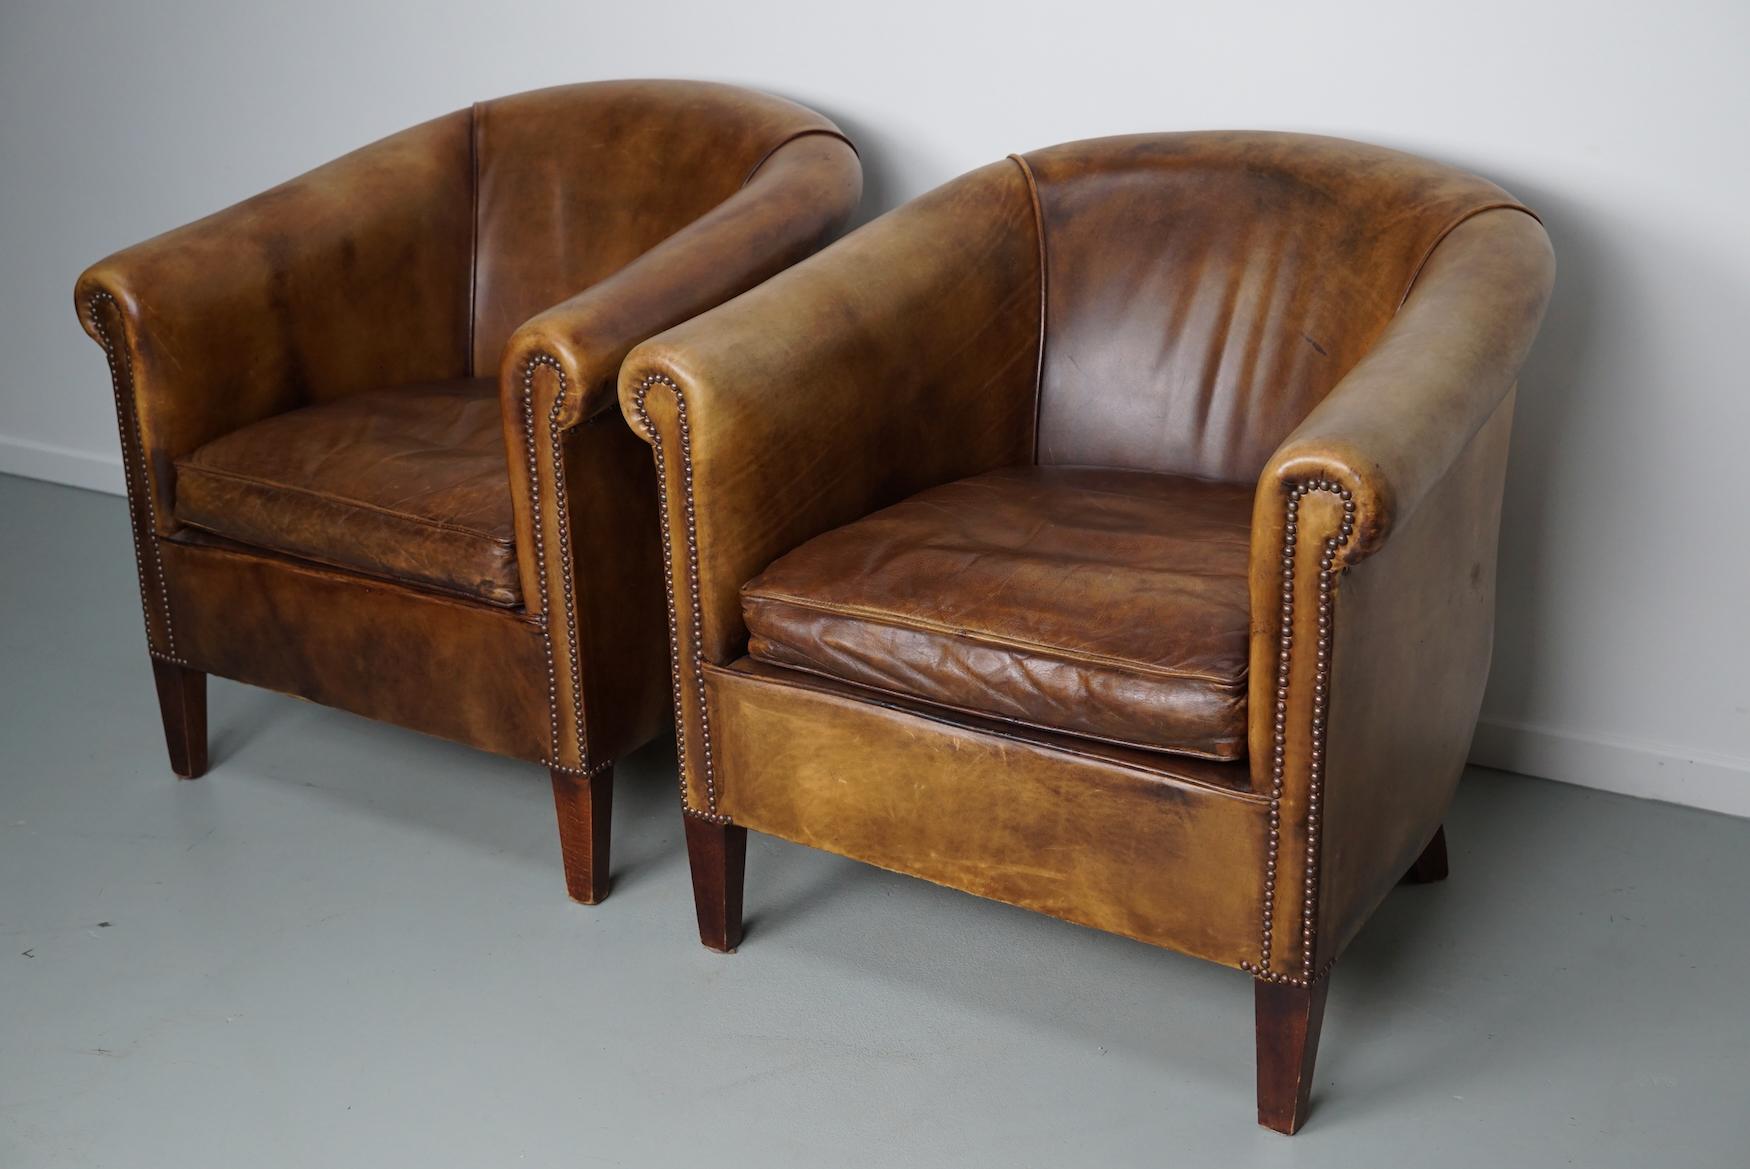 This pair of cognac-colored leather club chairs come from the Netherlands. They are upholstered with cognac/brown-colored leather and feature metal rivets and wooden legs.